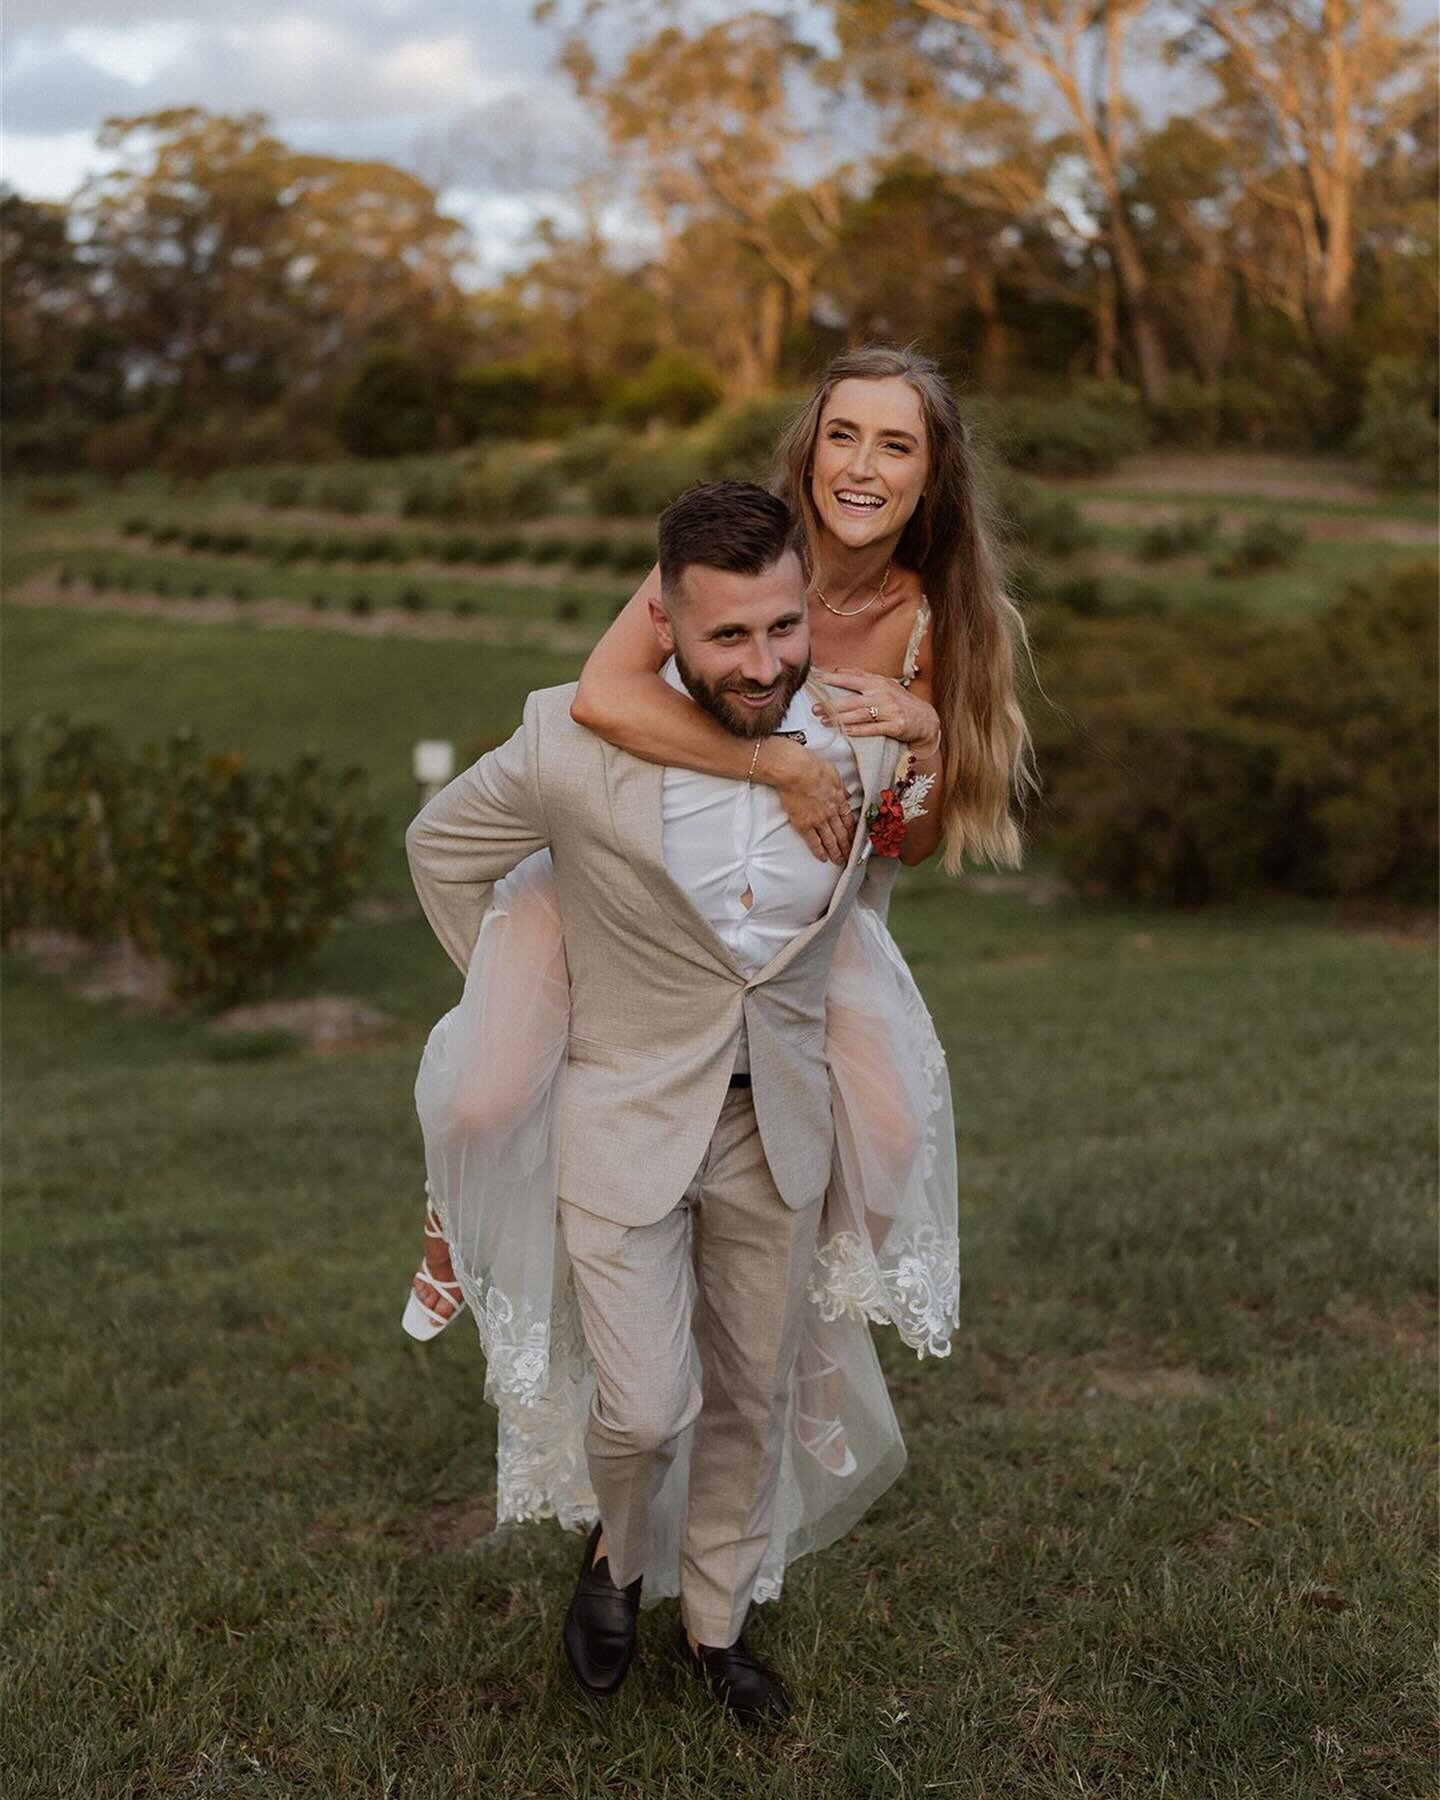 Matty &amp; Tash!! What a beautiful day at @growwild.weddings celebrating these two. Matty and I have been friends for a few years now via landscape photography, and it was an absolute pleasure to capture his &amp; Tash&rsquo;s wedding at such a stun